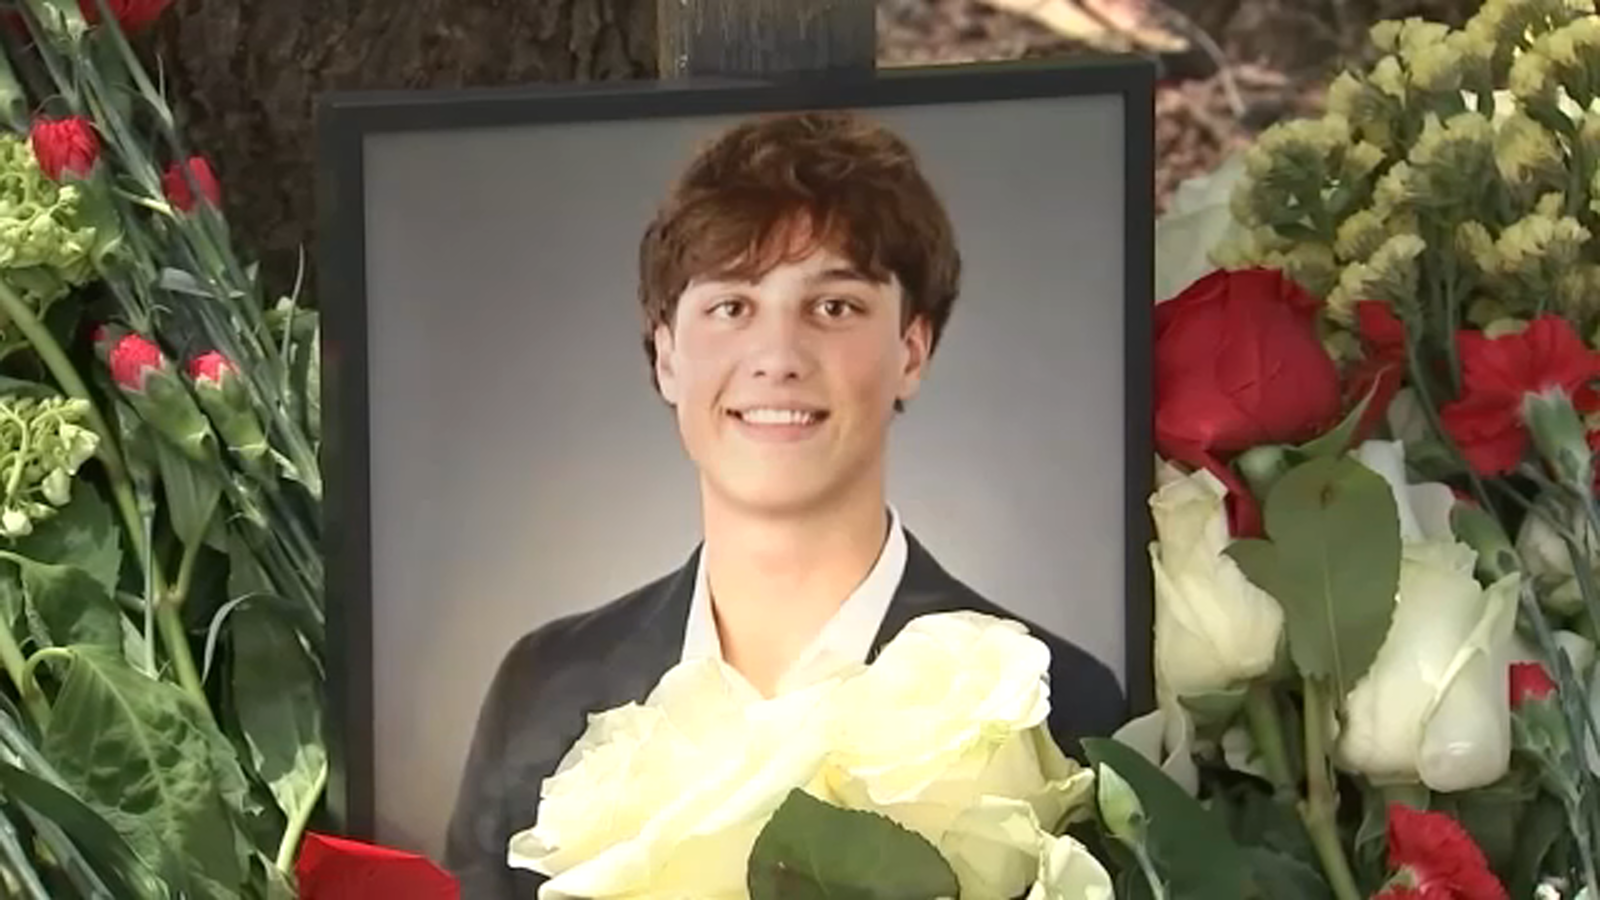 Family of Glenbrook South High School’s Marko Niketic, teen killed in Glenview car accident, hold funeral at St. Sava Monastery [Video]